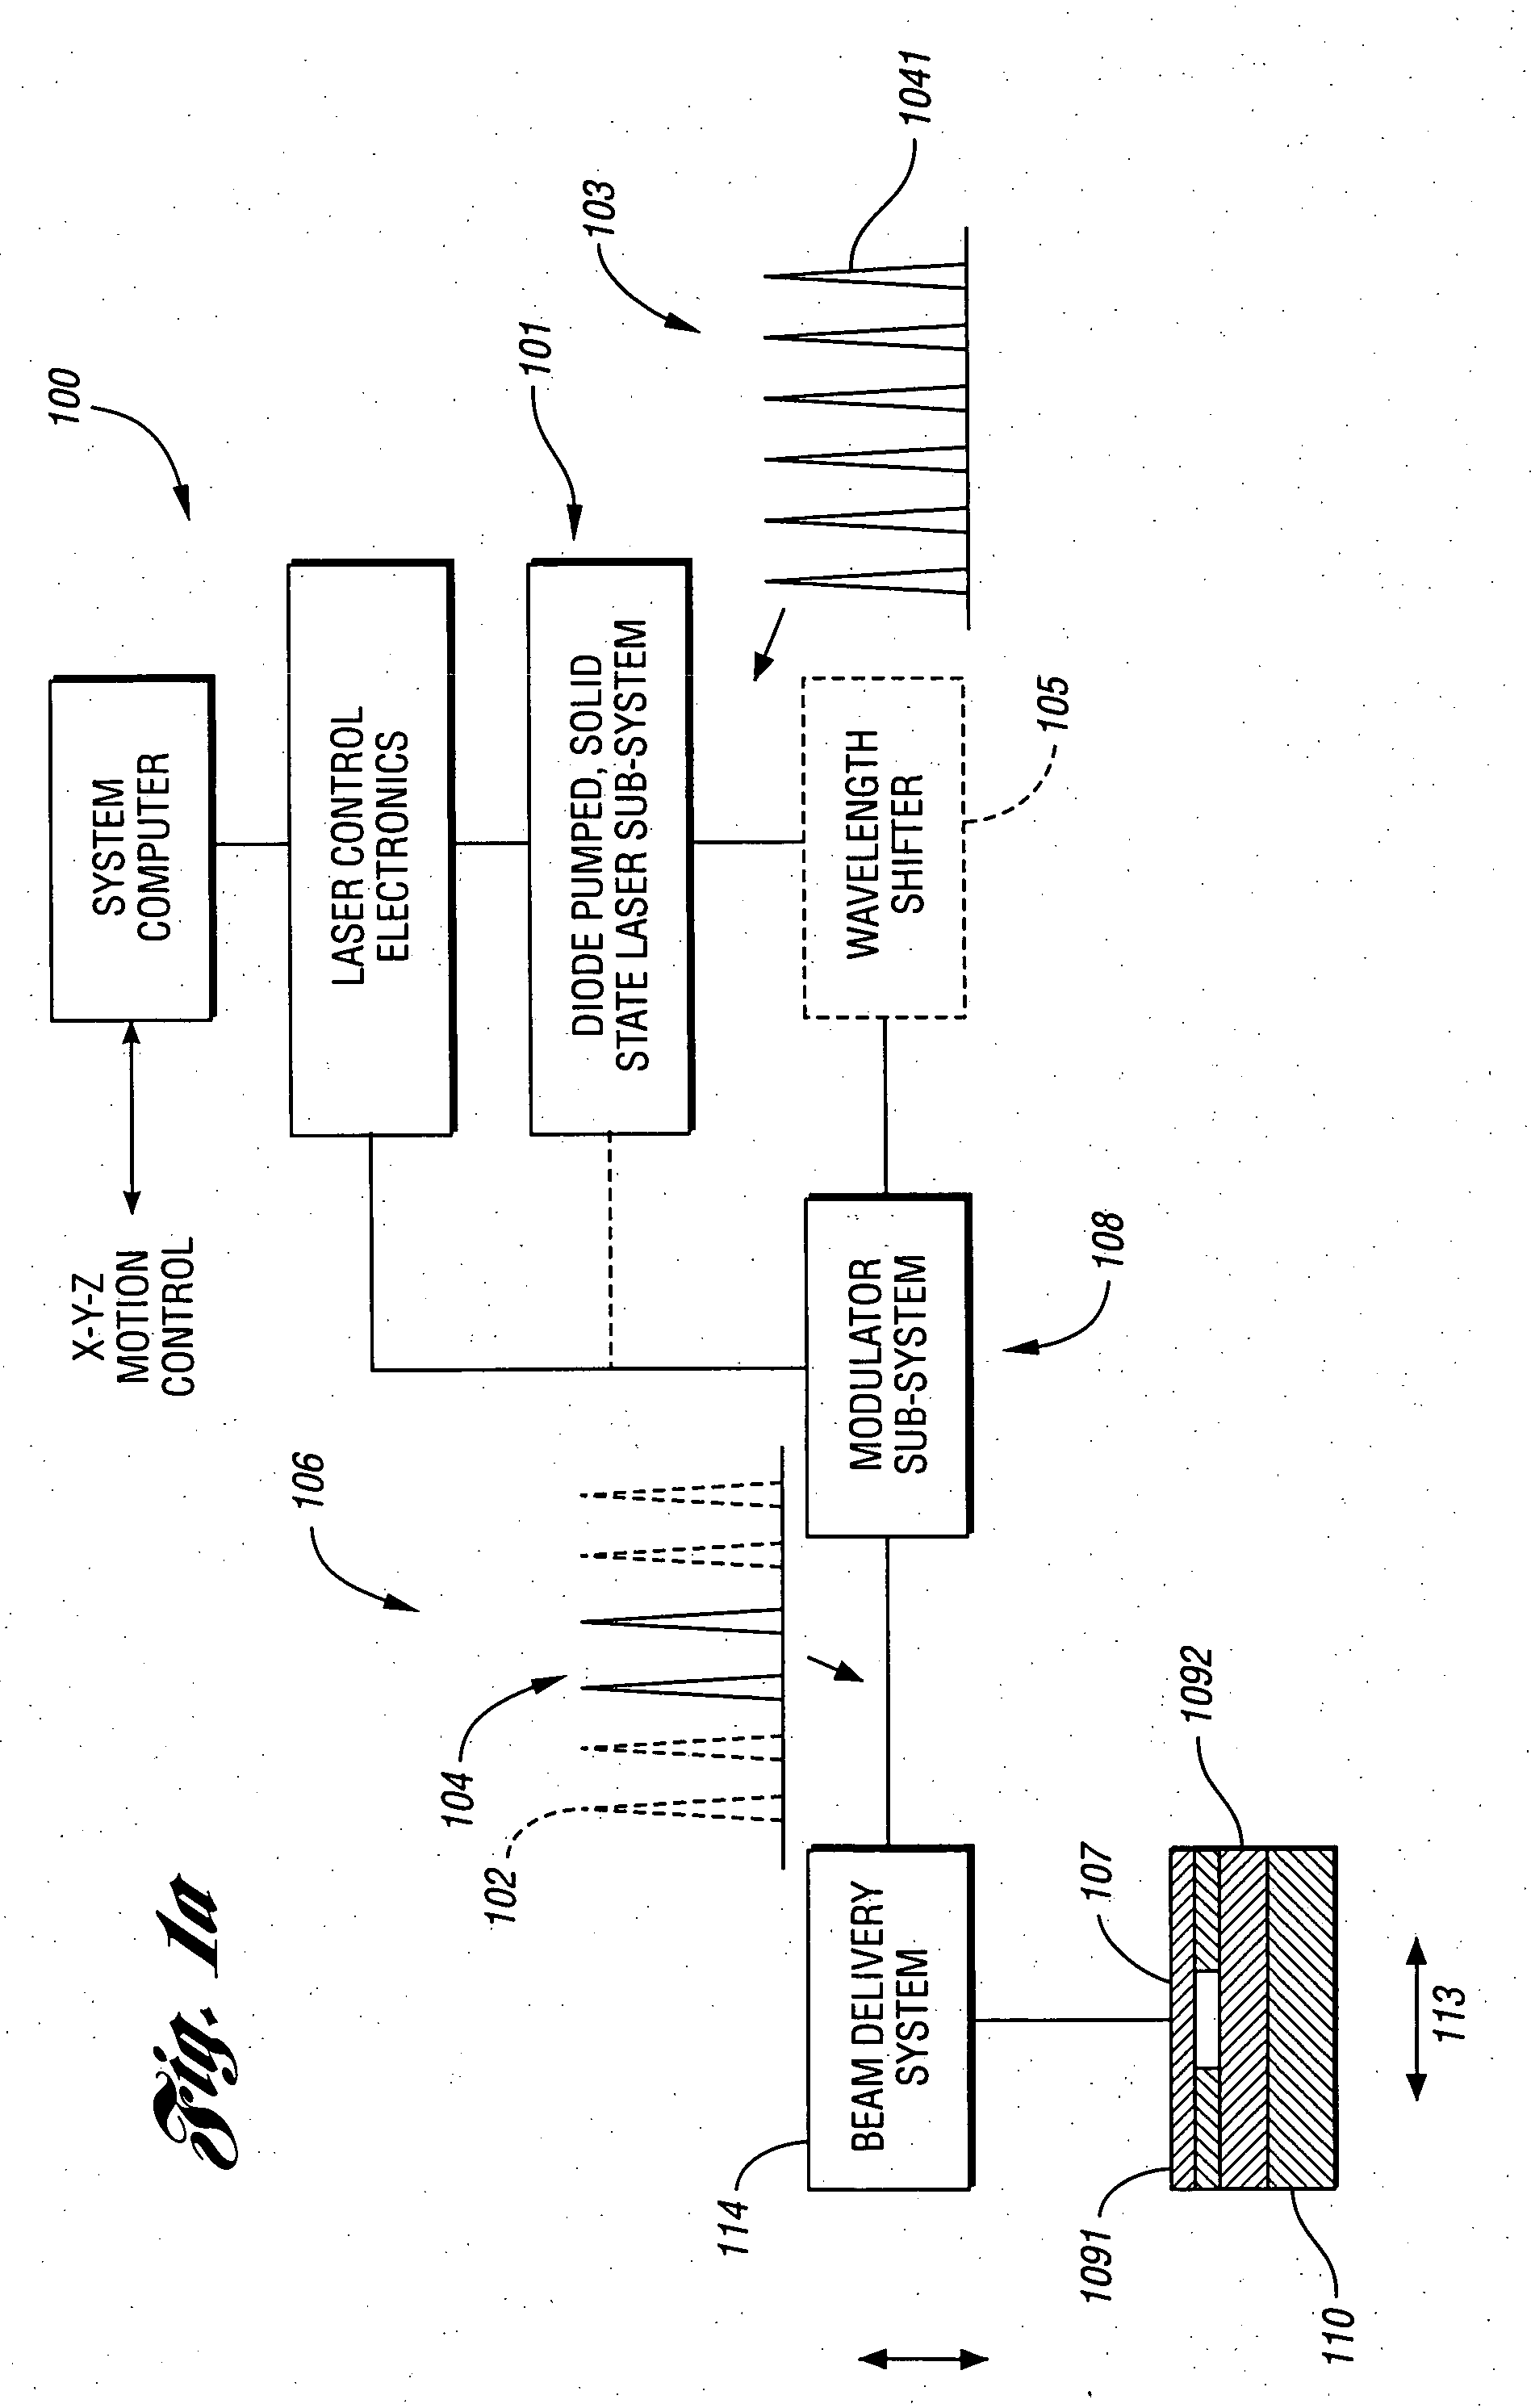 Laser-based method and system for memory link processing with picosecond lasers